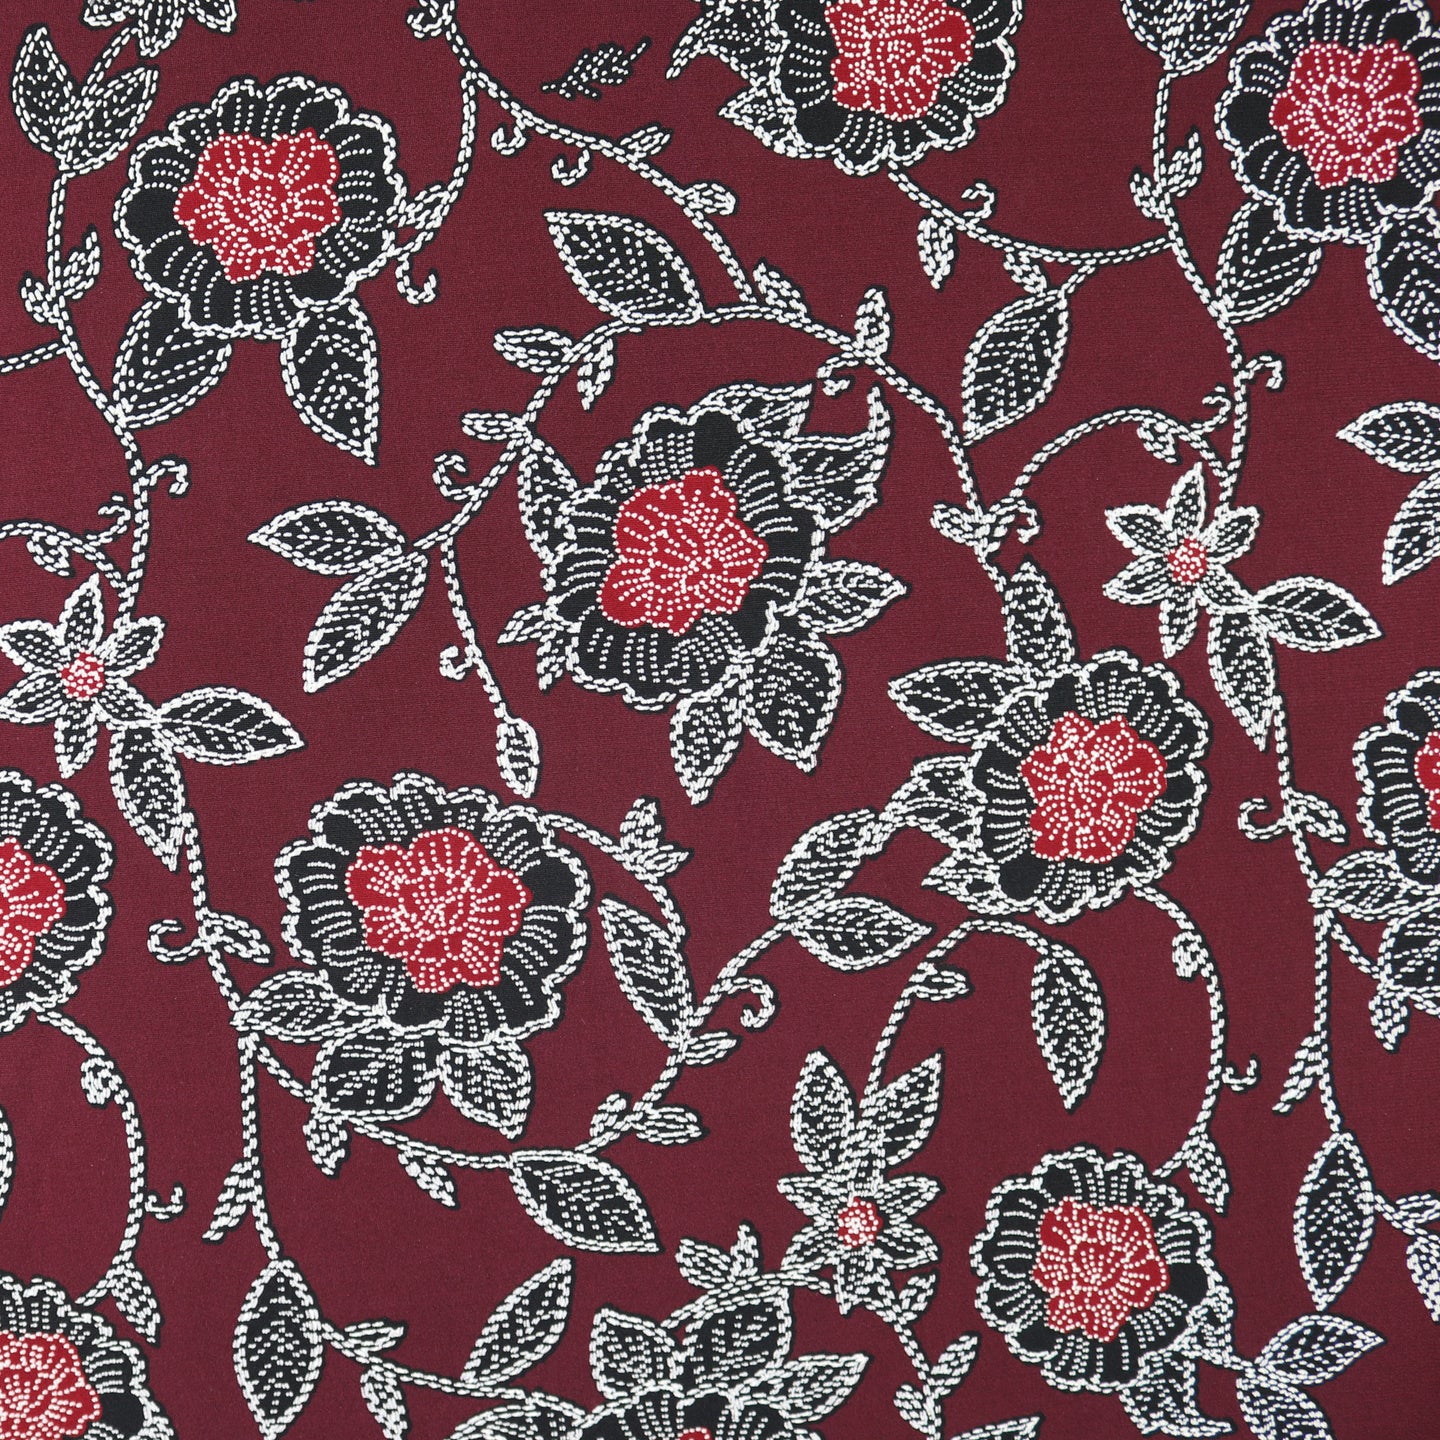 Flower Pattern Printed Polyester/Spandex ITY Knit Fabric with Puff by the Yard, 58-60